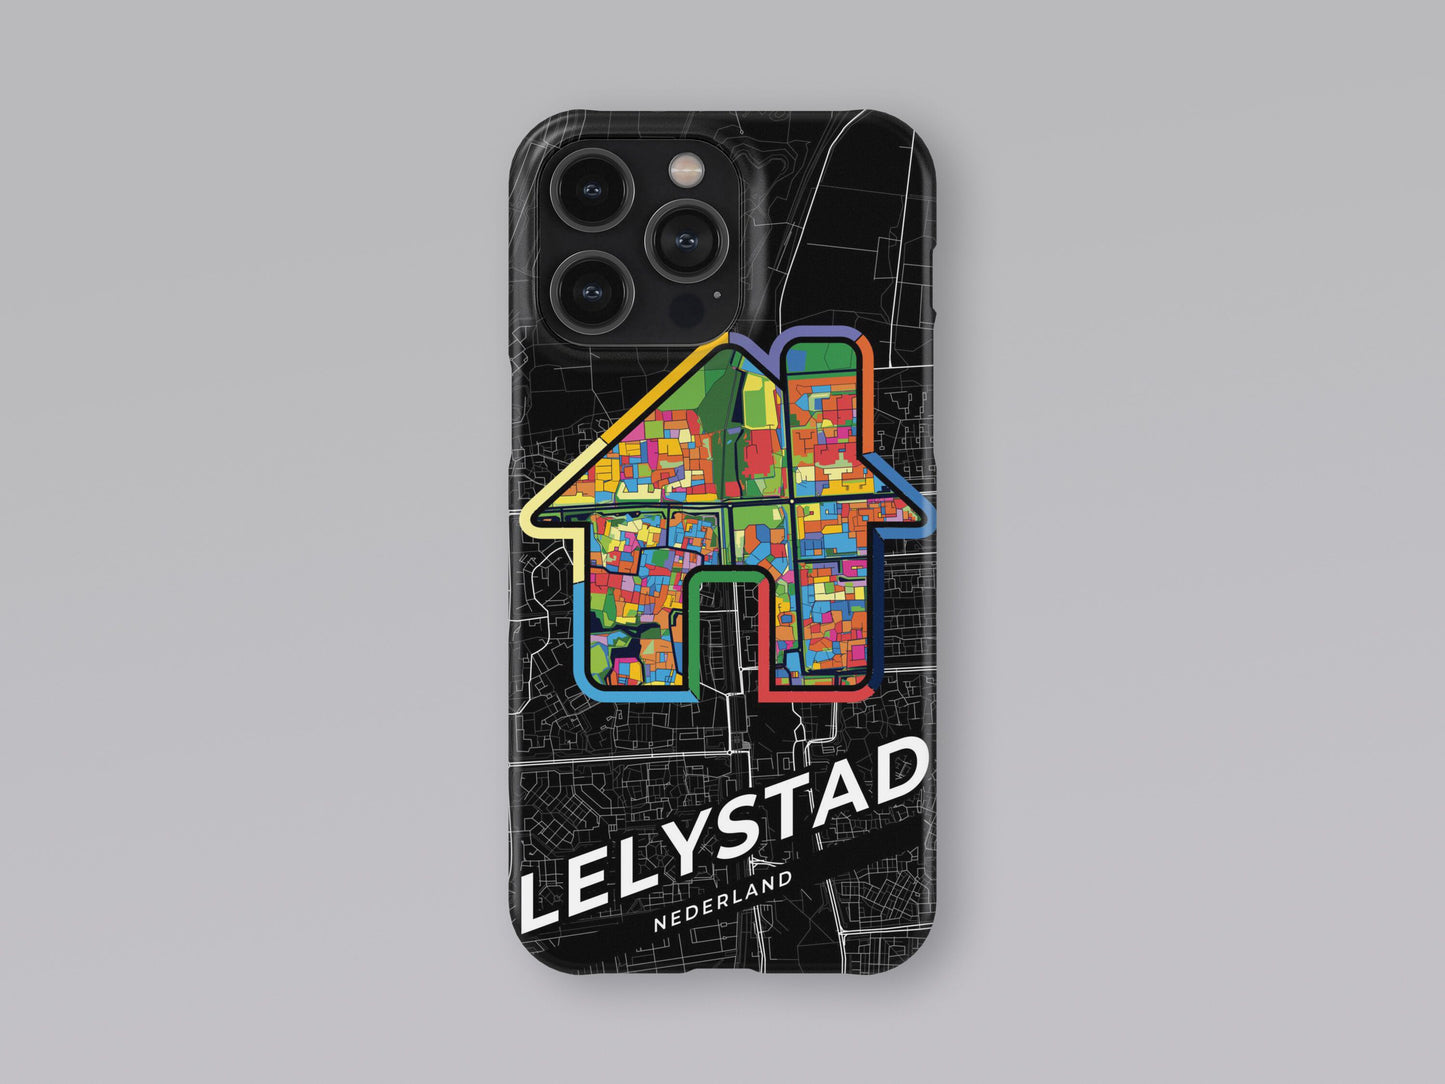 Lelystad Netherlands slim phone case with colorful icon. Birthday, wedding or housewarming gift. Couple match cases. 3